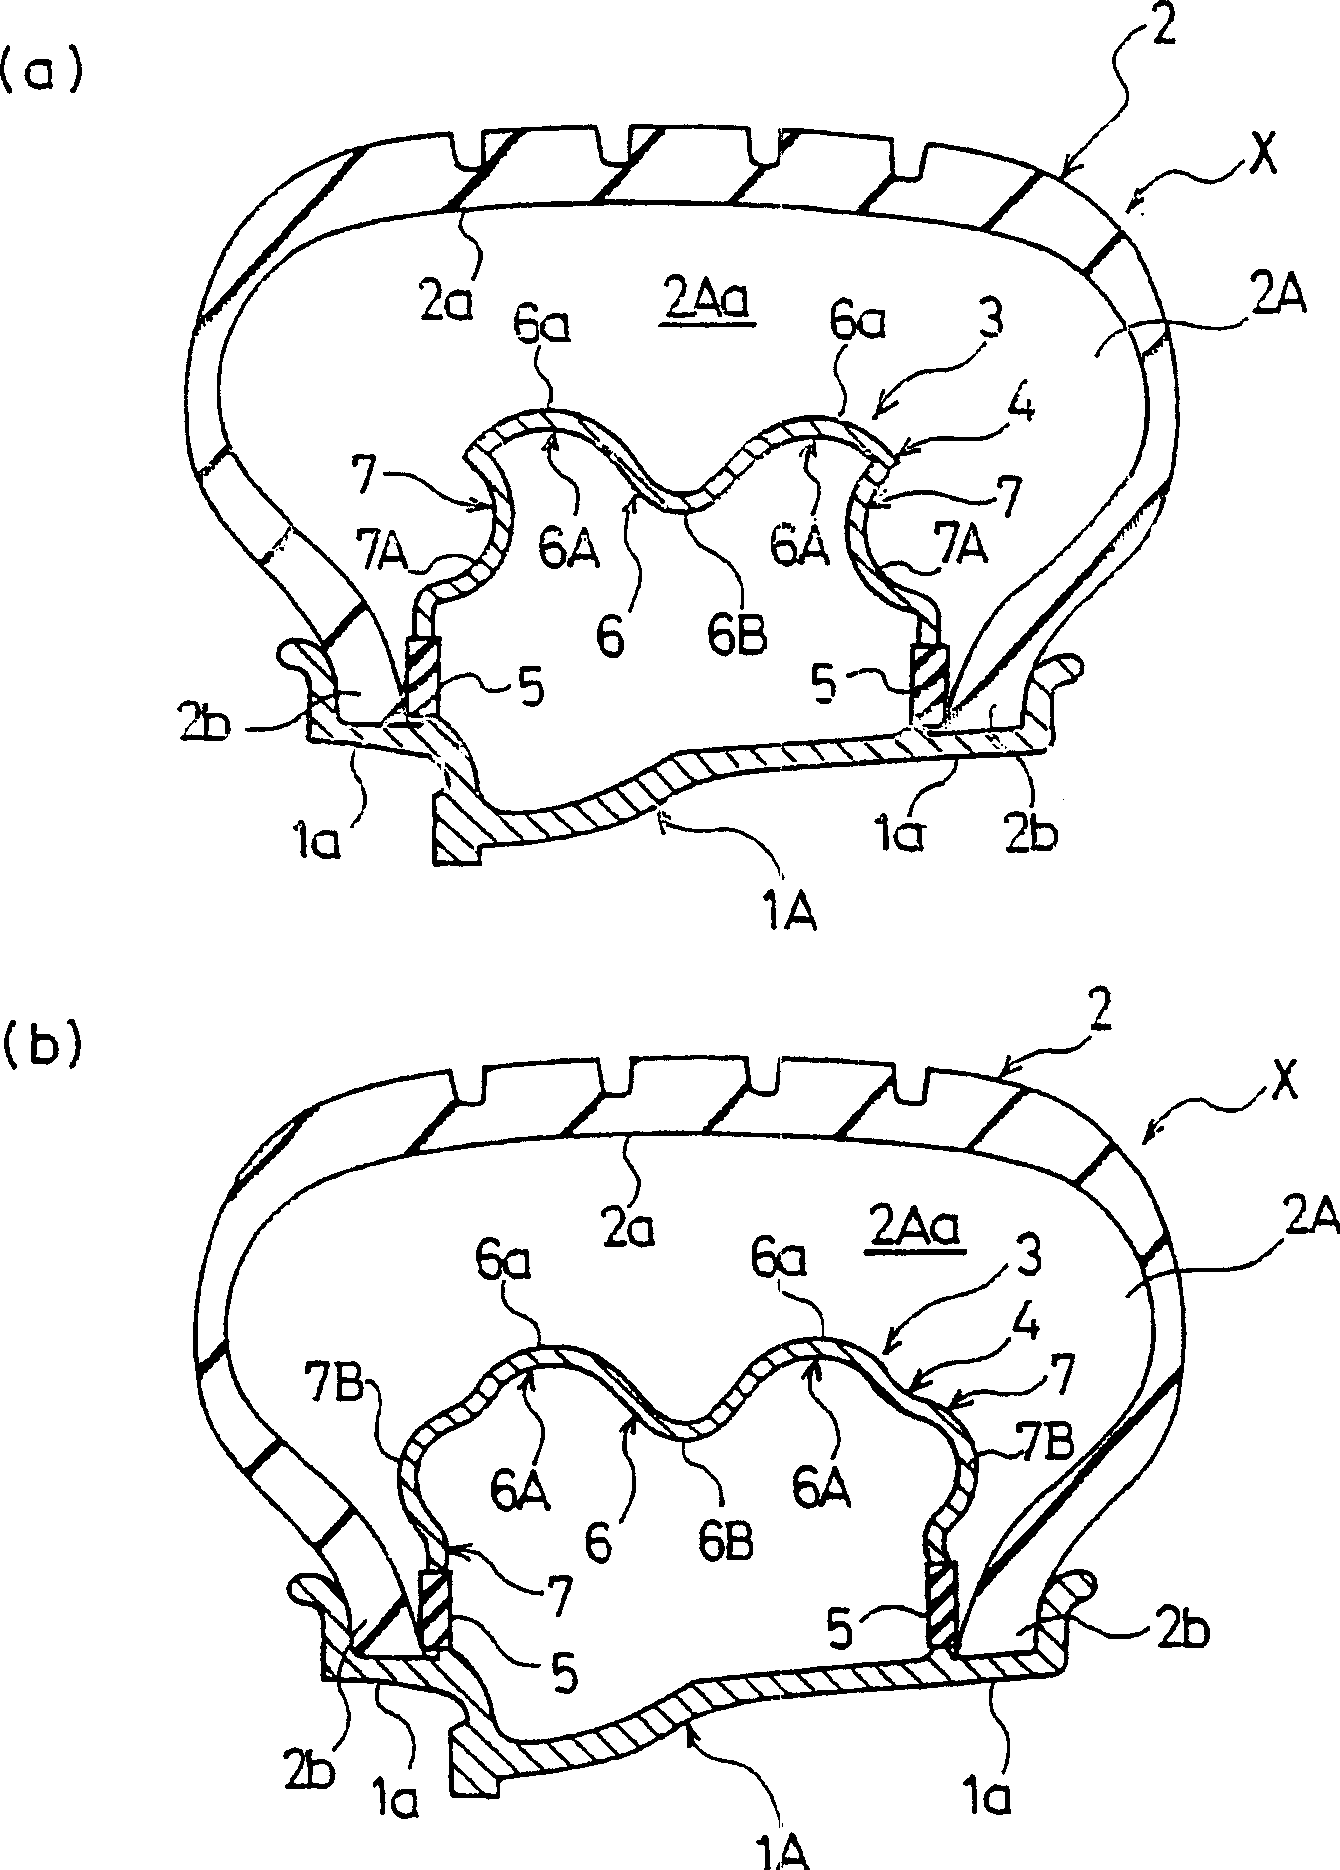 Tire/wheel assembly body and supporting body for traveling with tire flat